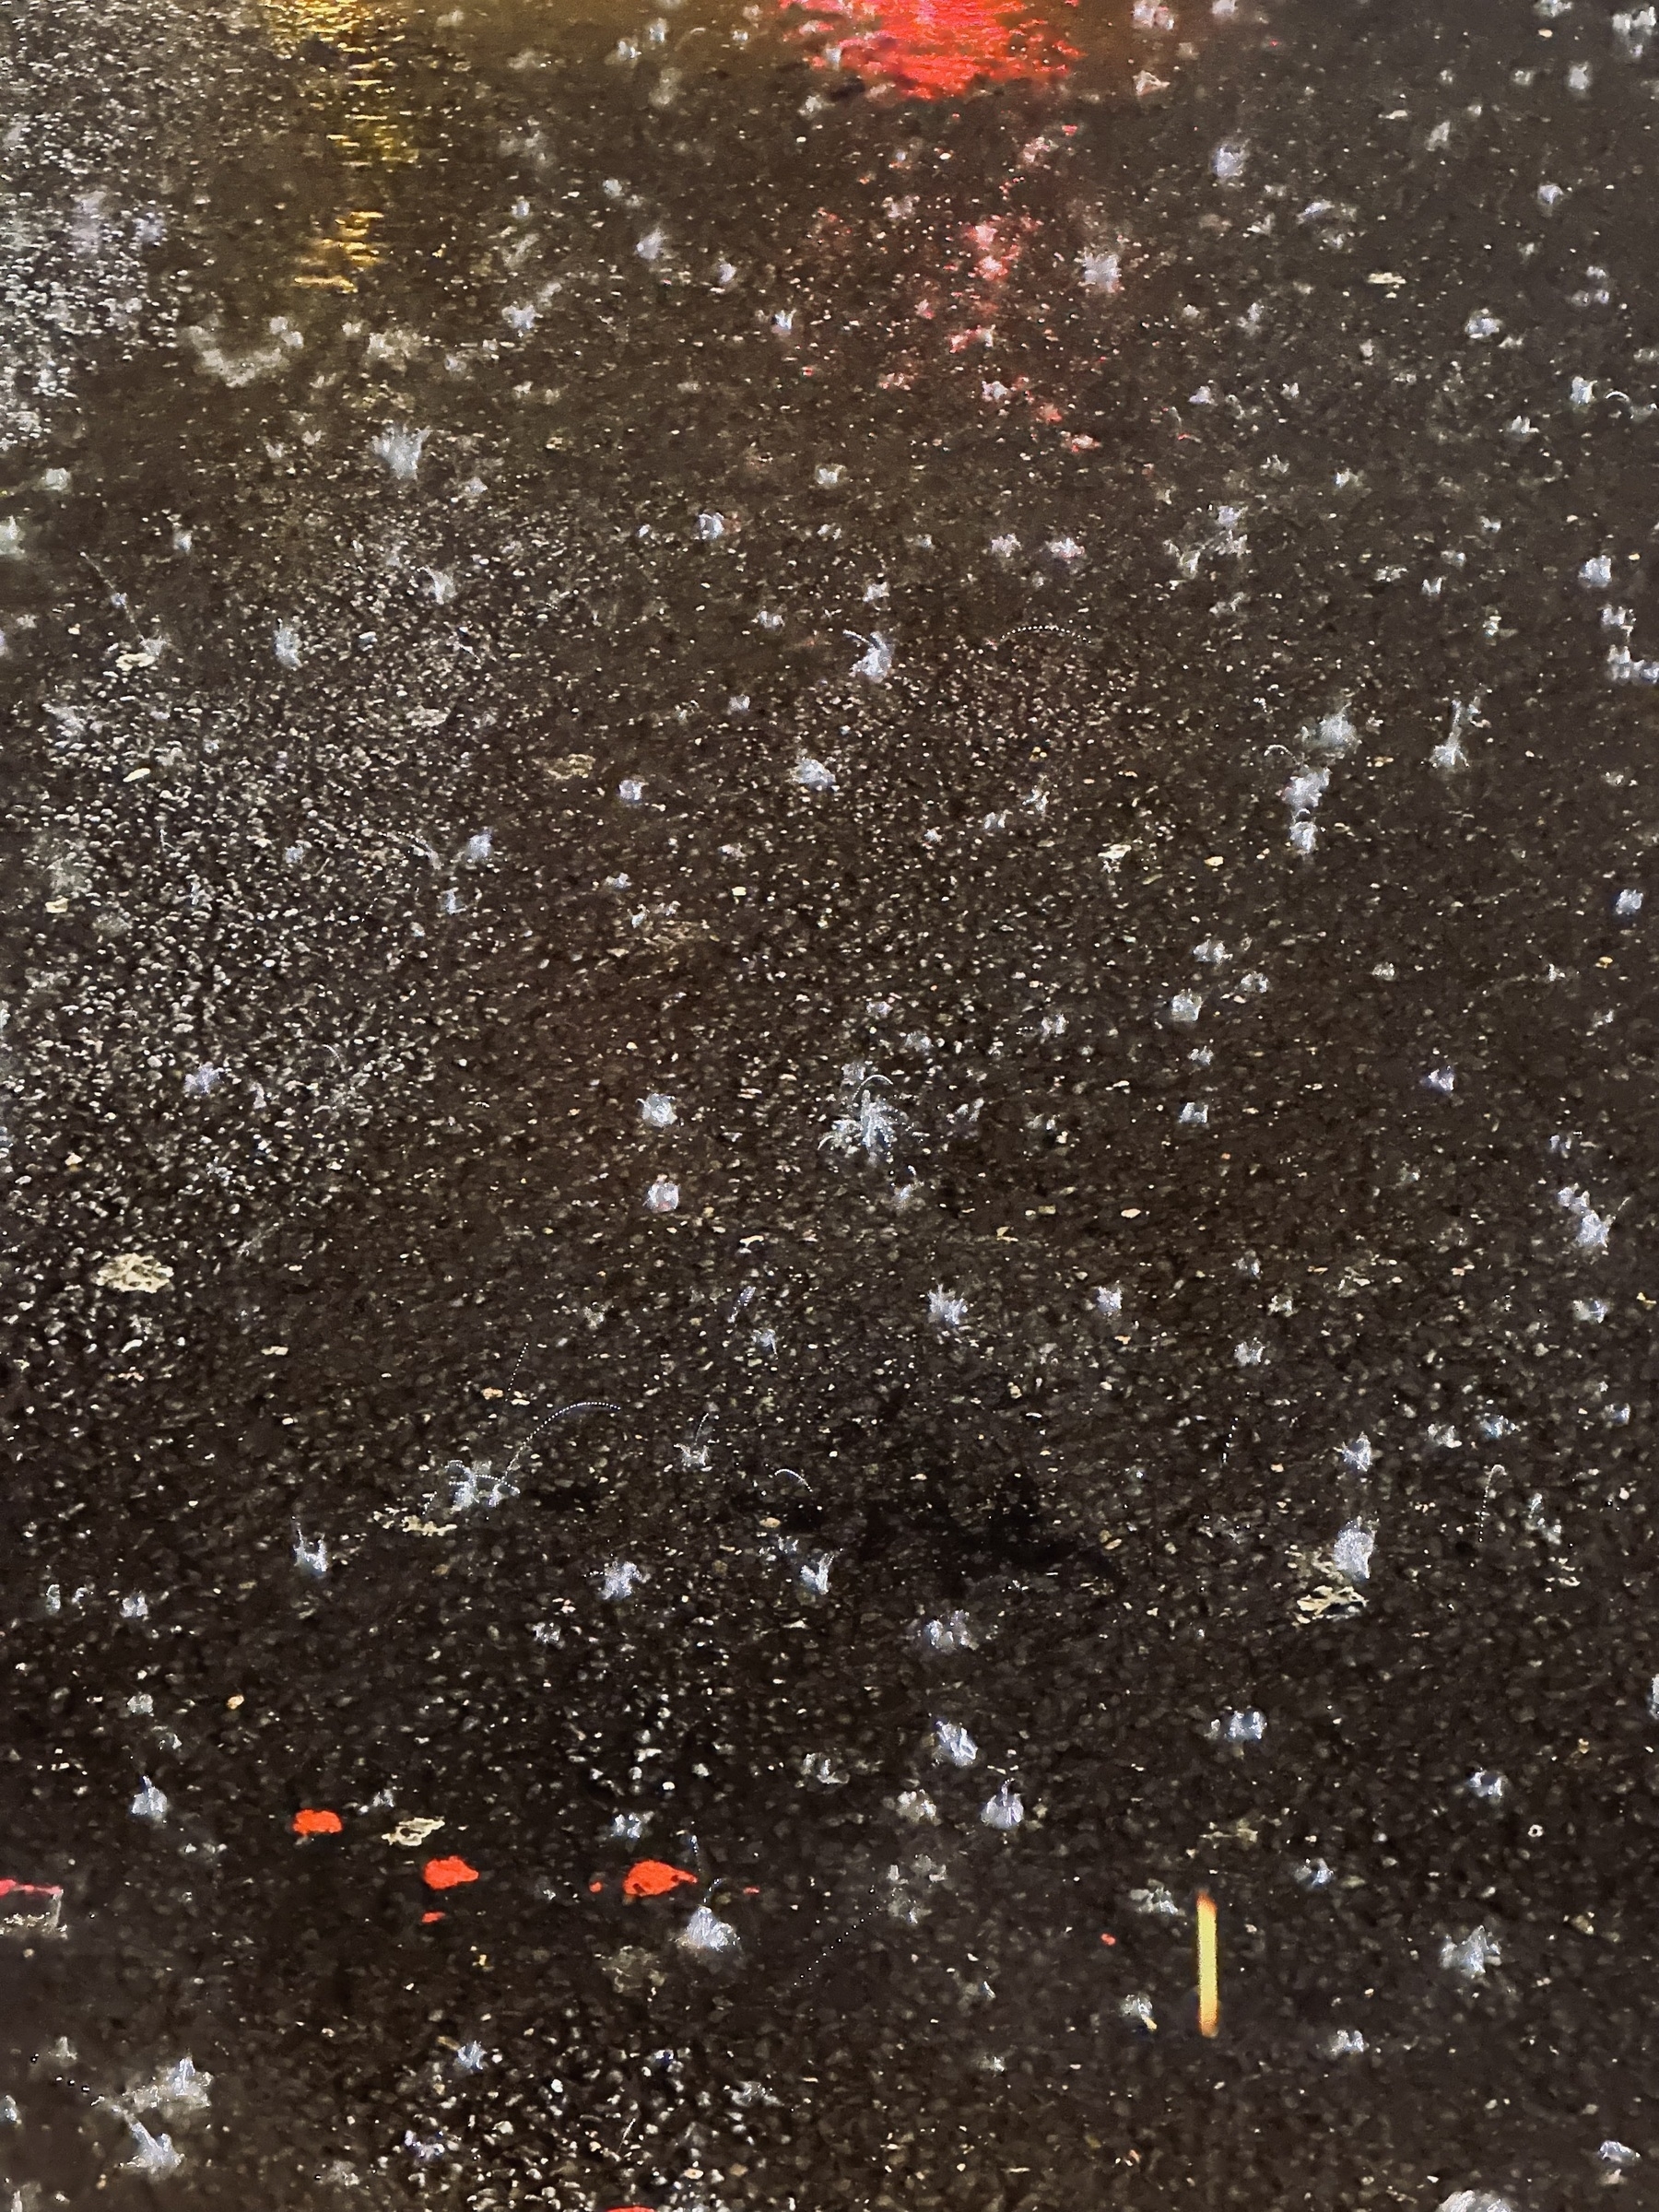 Raindrops and reflections of light on wet tarmac at night.